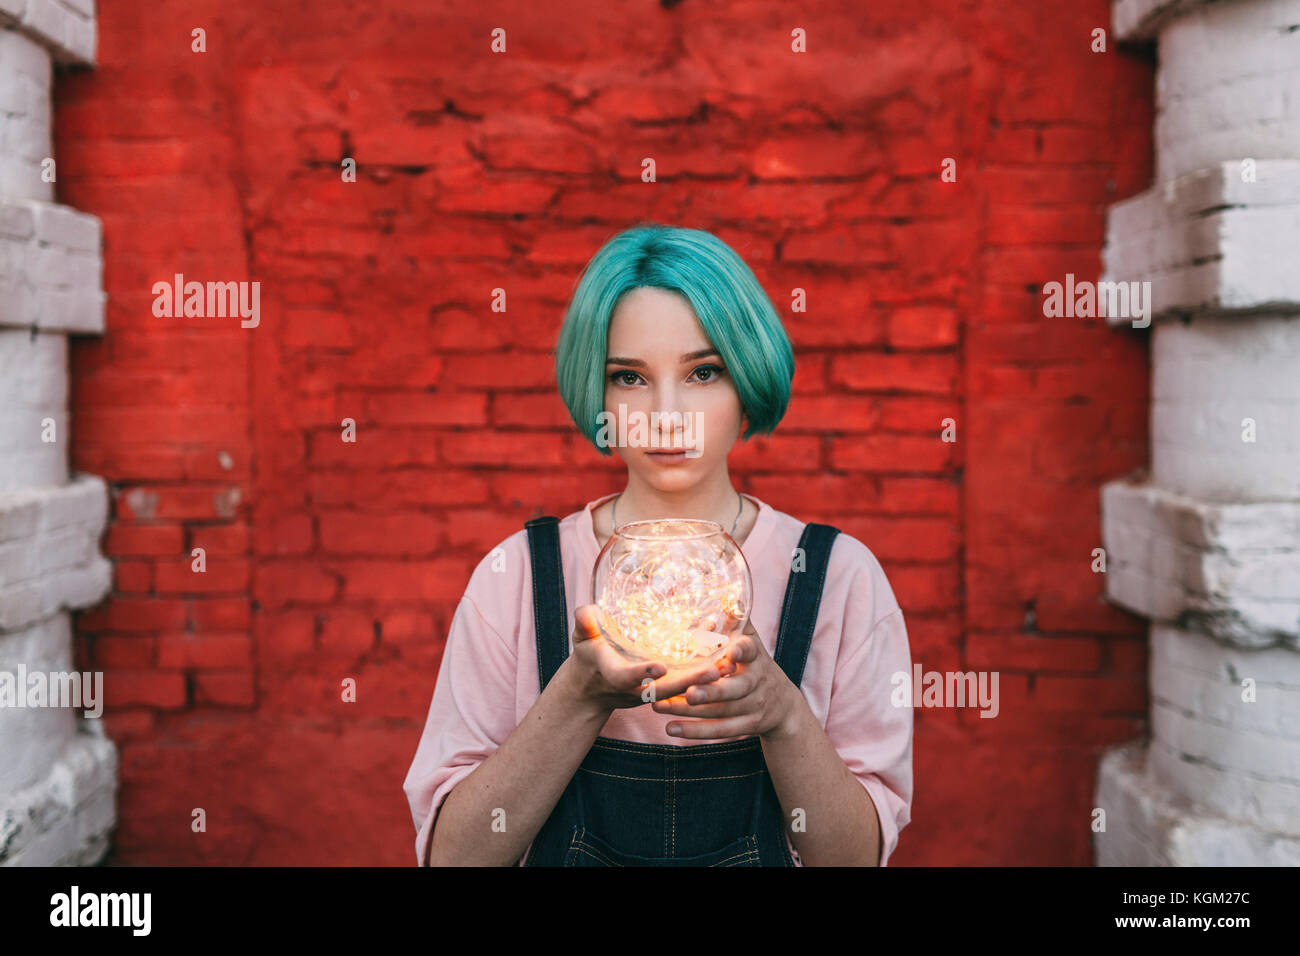 Portrait of teenage girl holding illuminated string lights while standing against brick wall Stock Photo